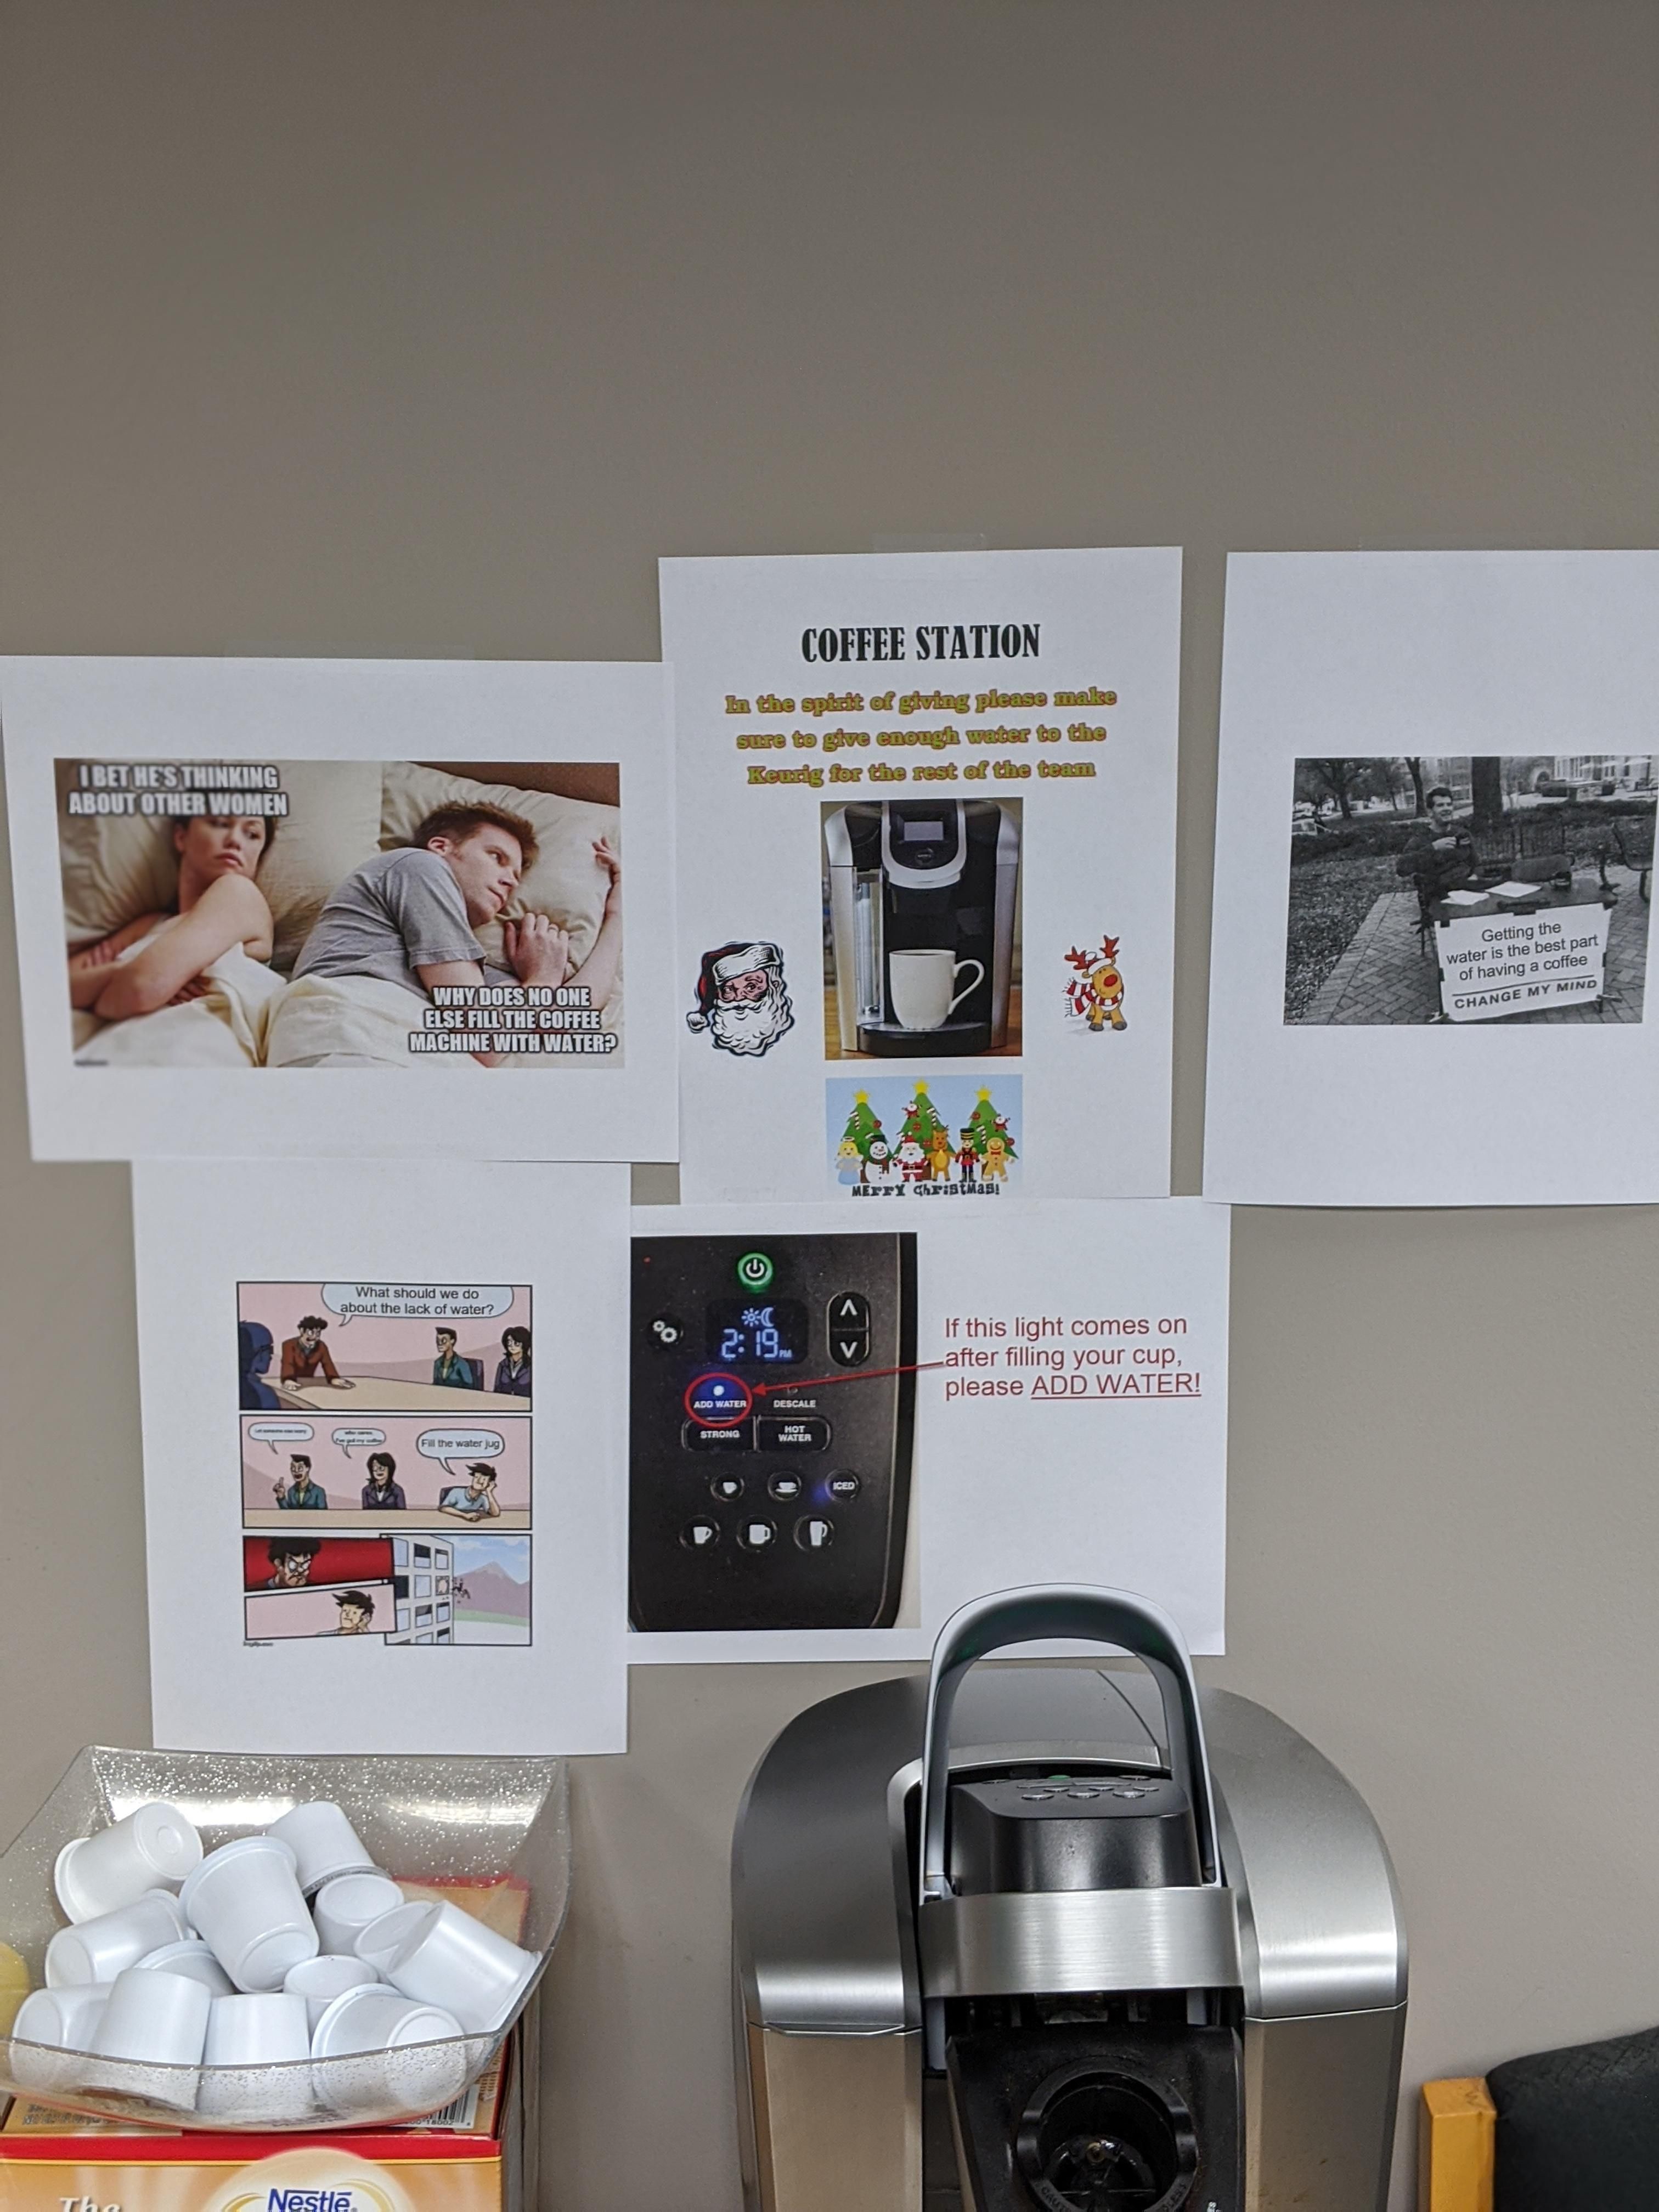 Things are getting out of hand with the office coffee machine..